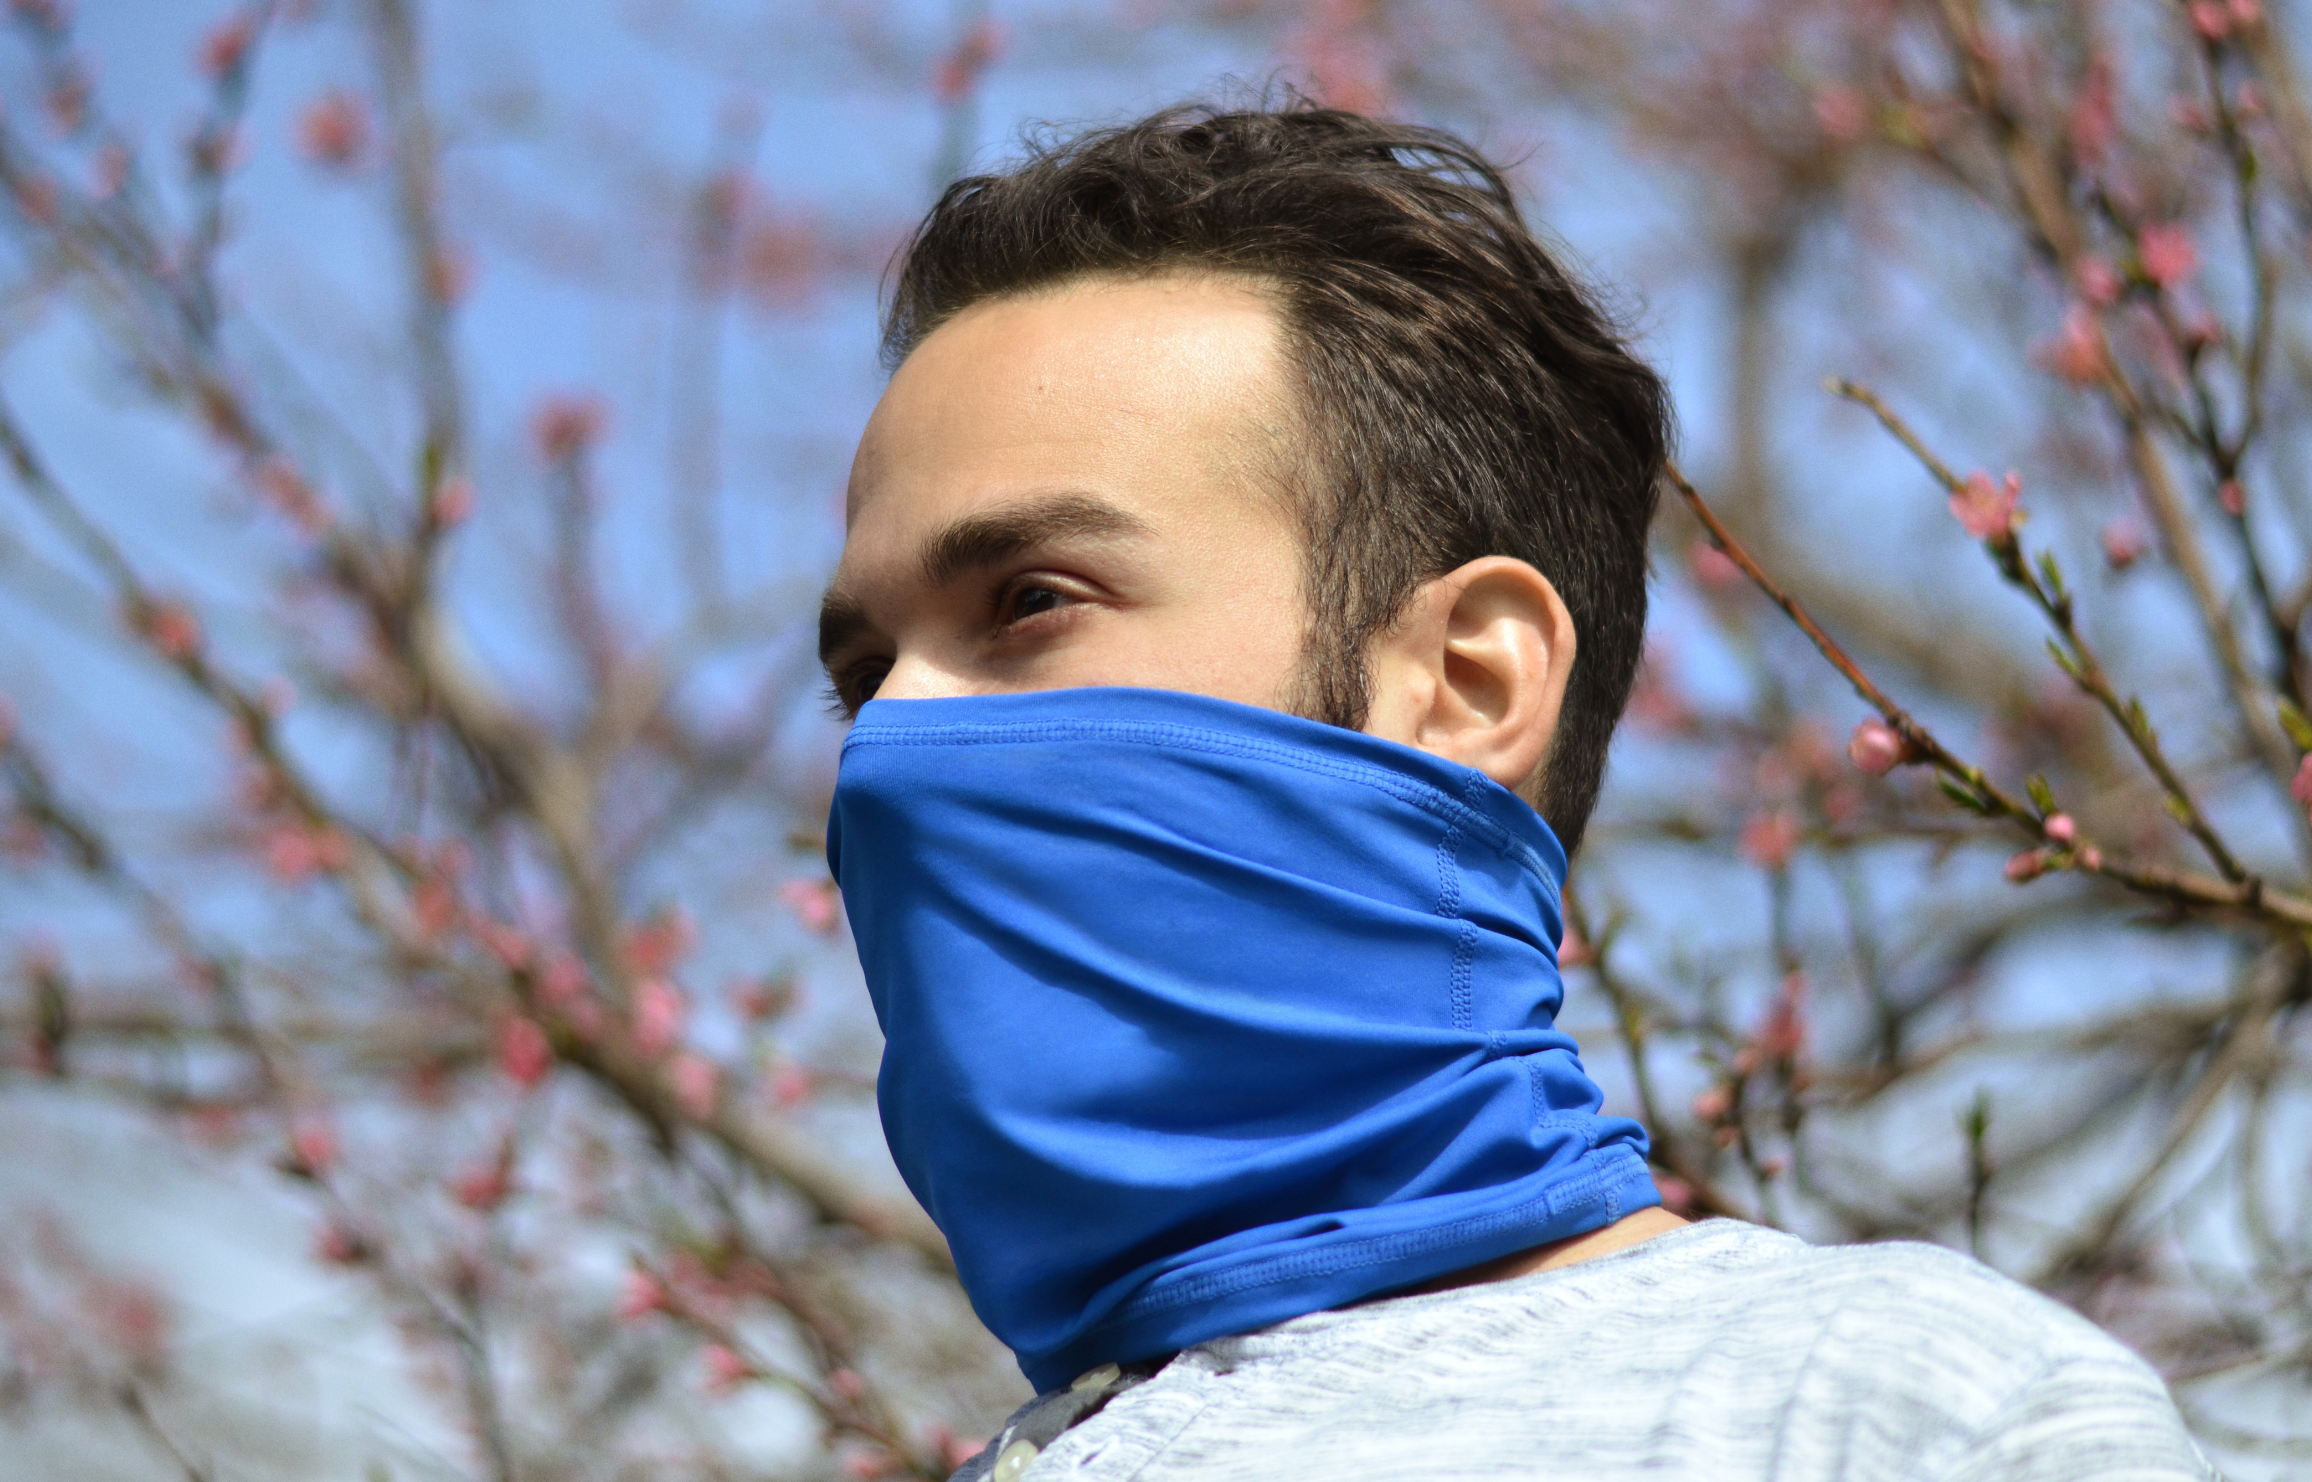 Stay Cool Outside This Summer With This Cooling Neck Gaiter